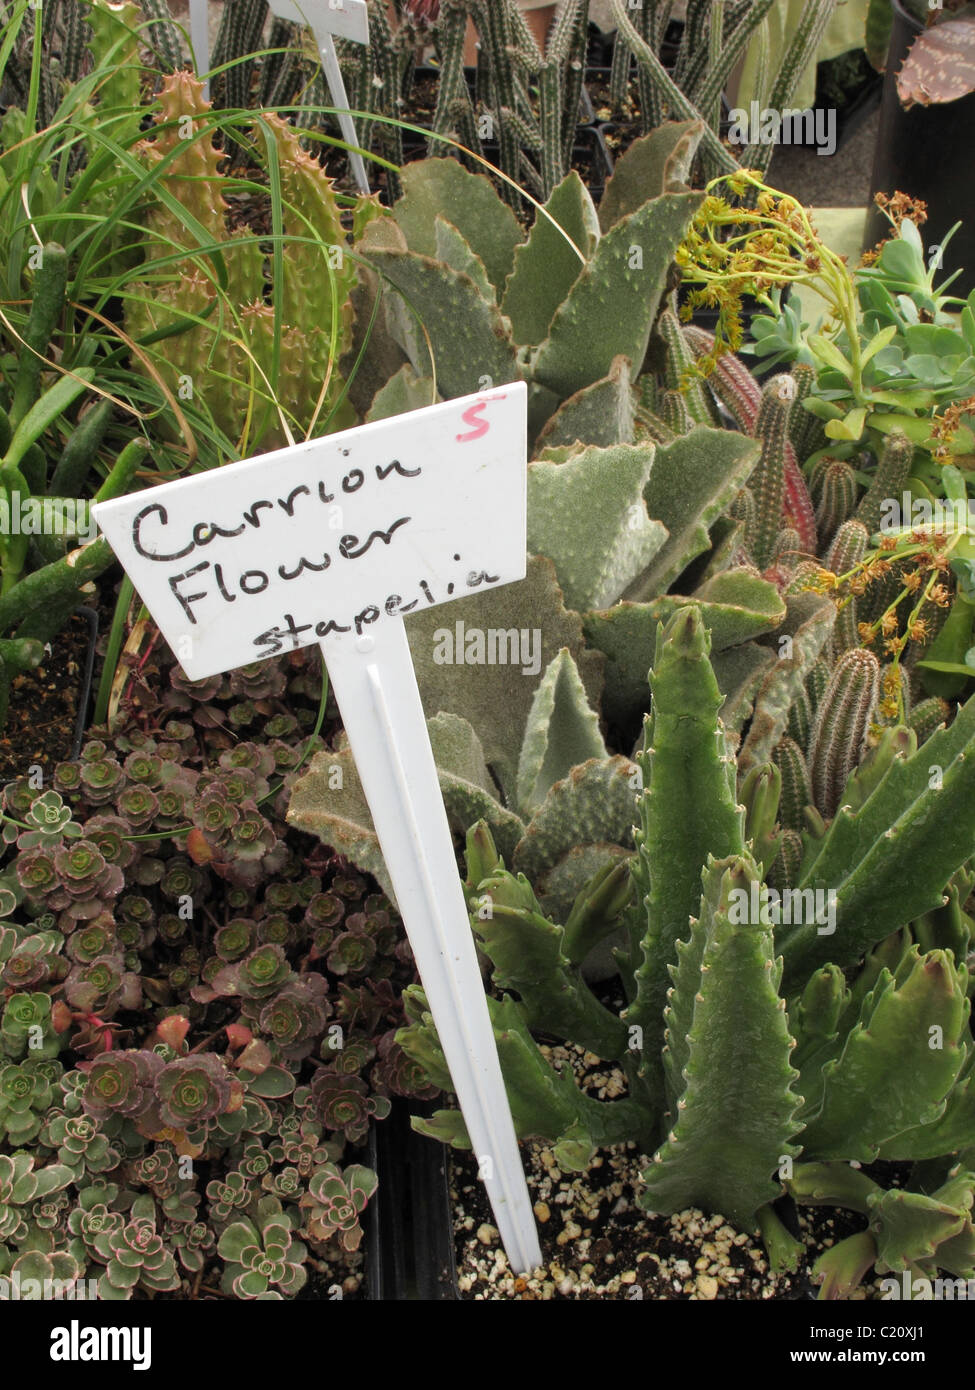 Carrion Flower Stapelia sign with cactus at farmers' market. Stock Photo